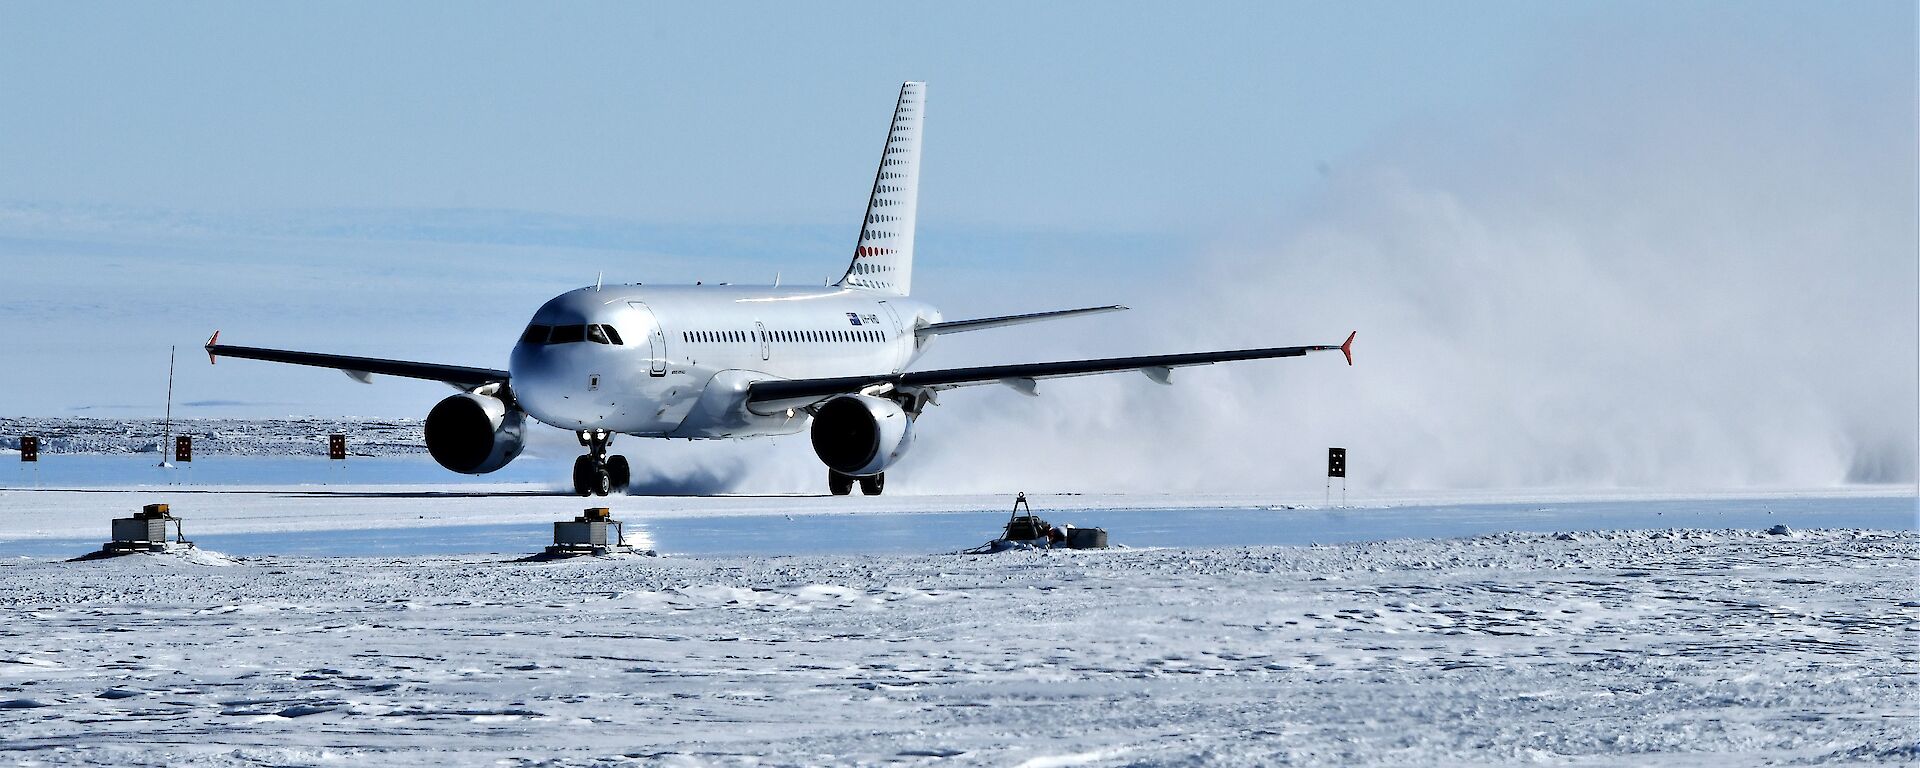 jet plane lands in plume of snow and ice